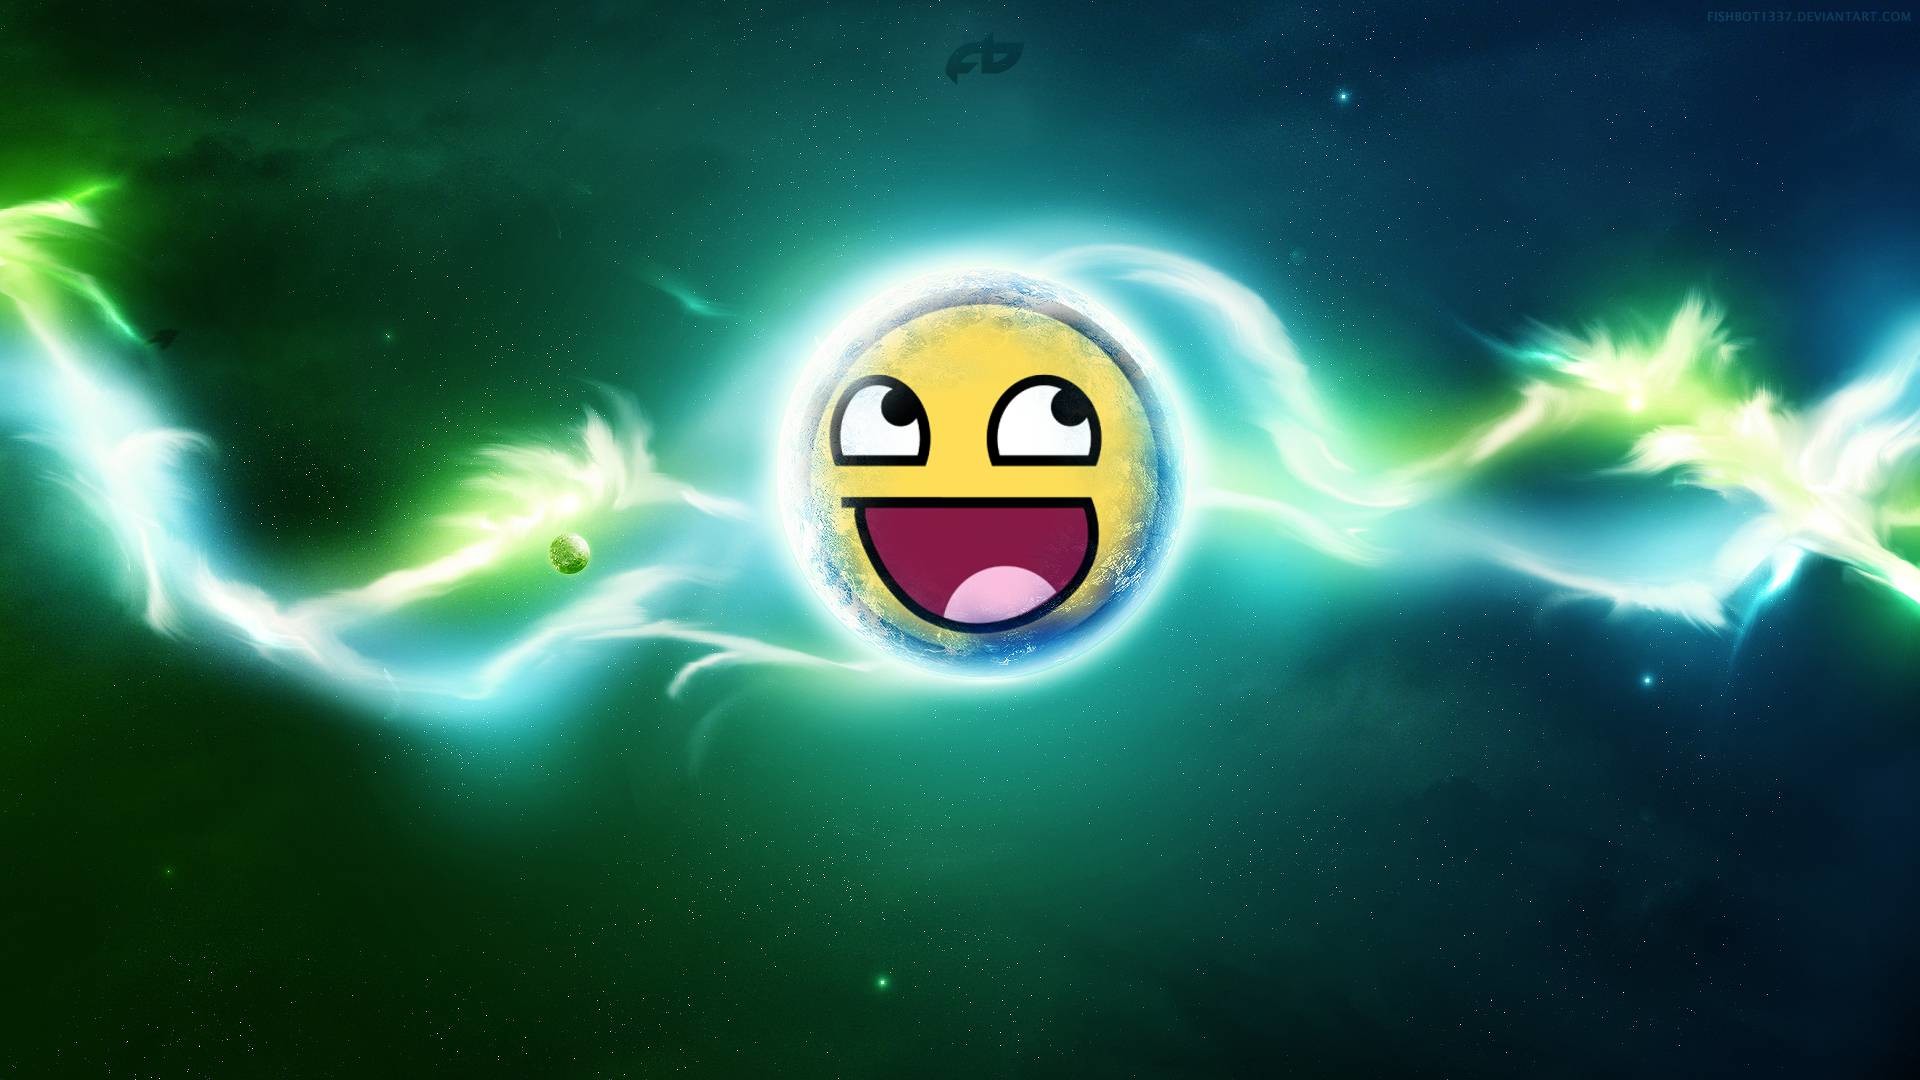 1920x1080 Awesome Smiley Face Backgrounds - Viewing Gallery